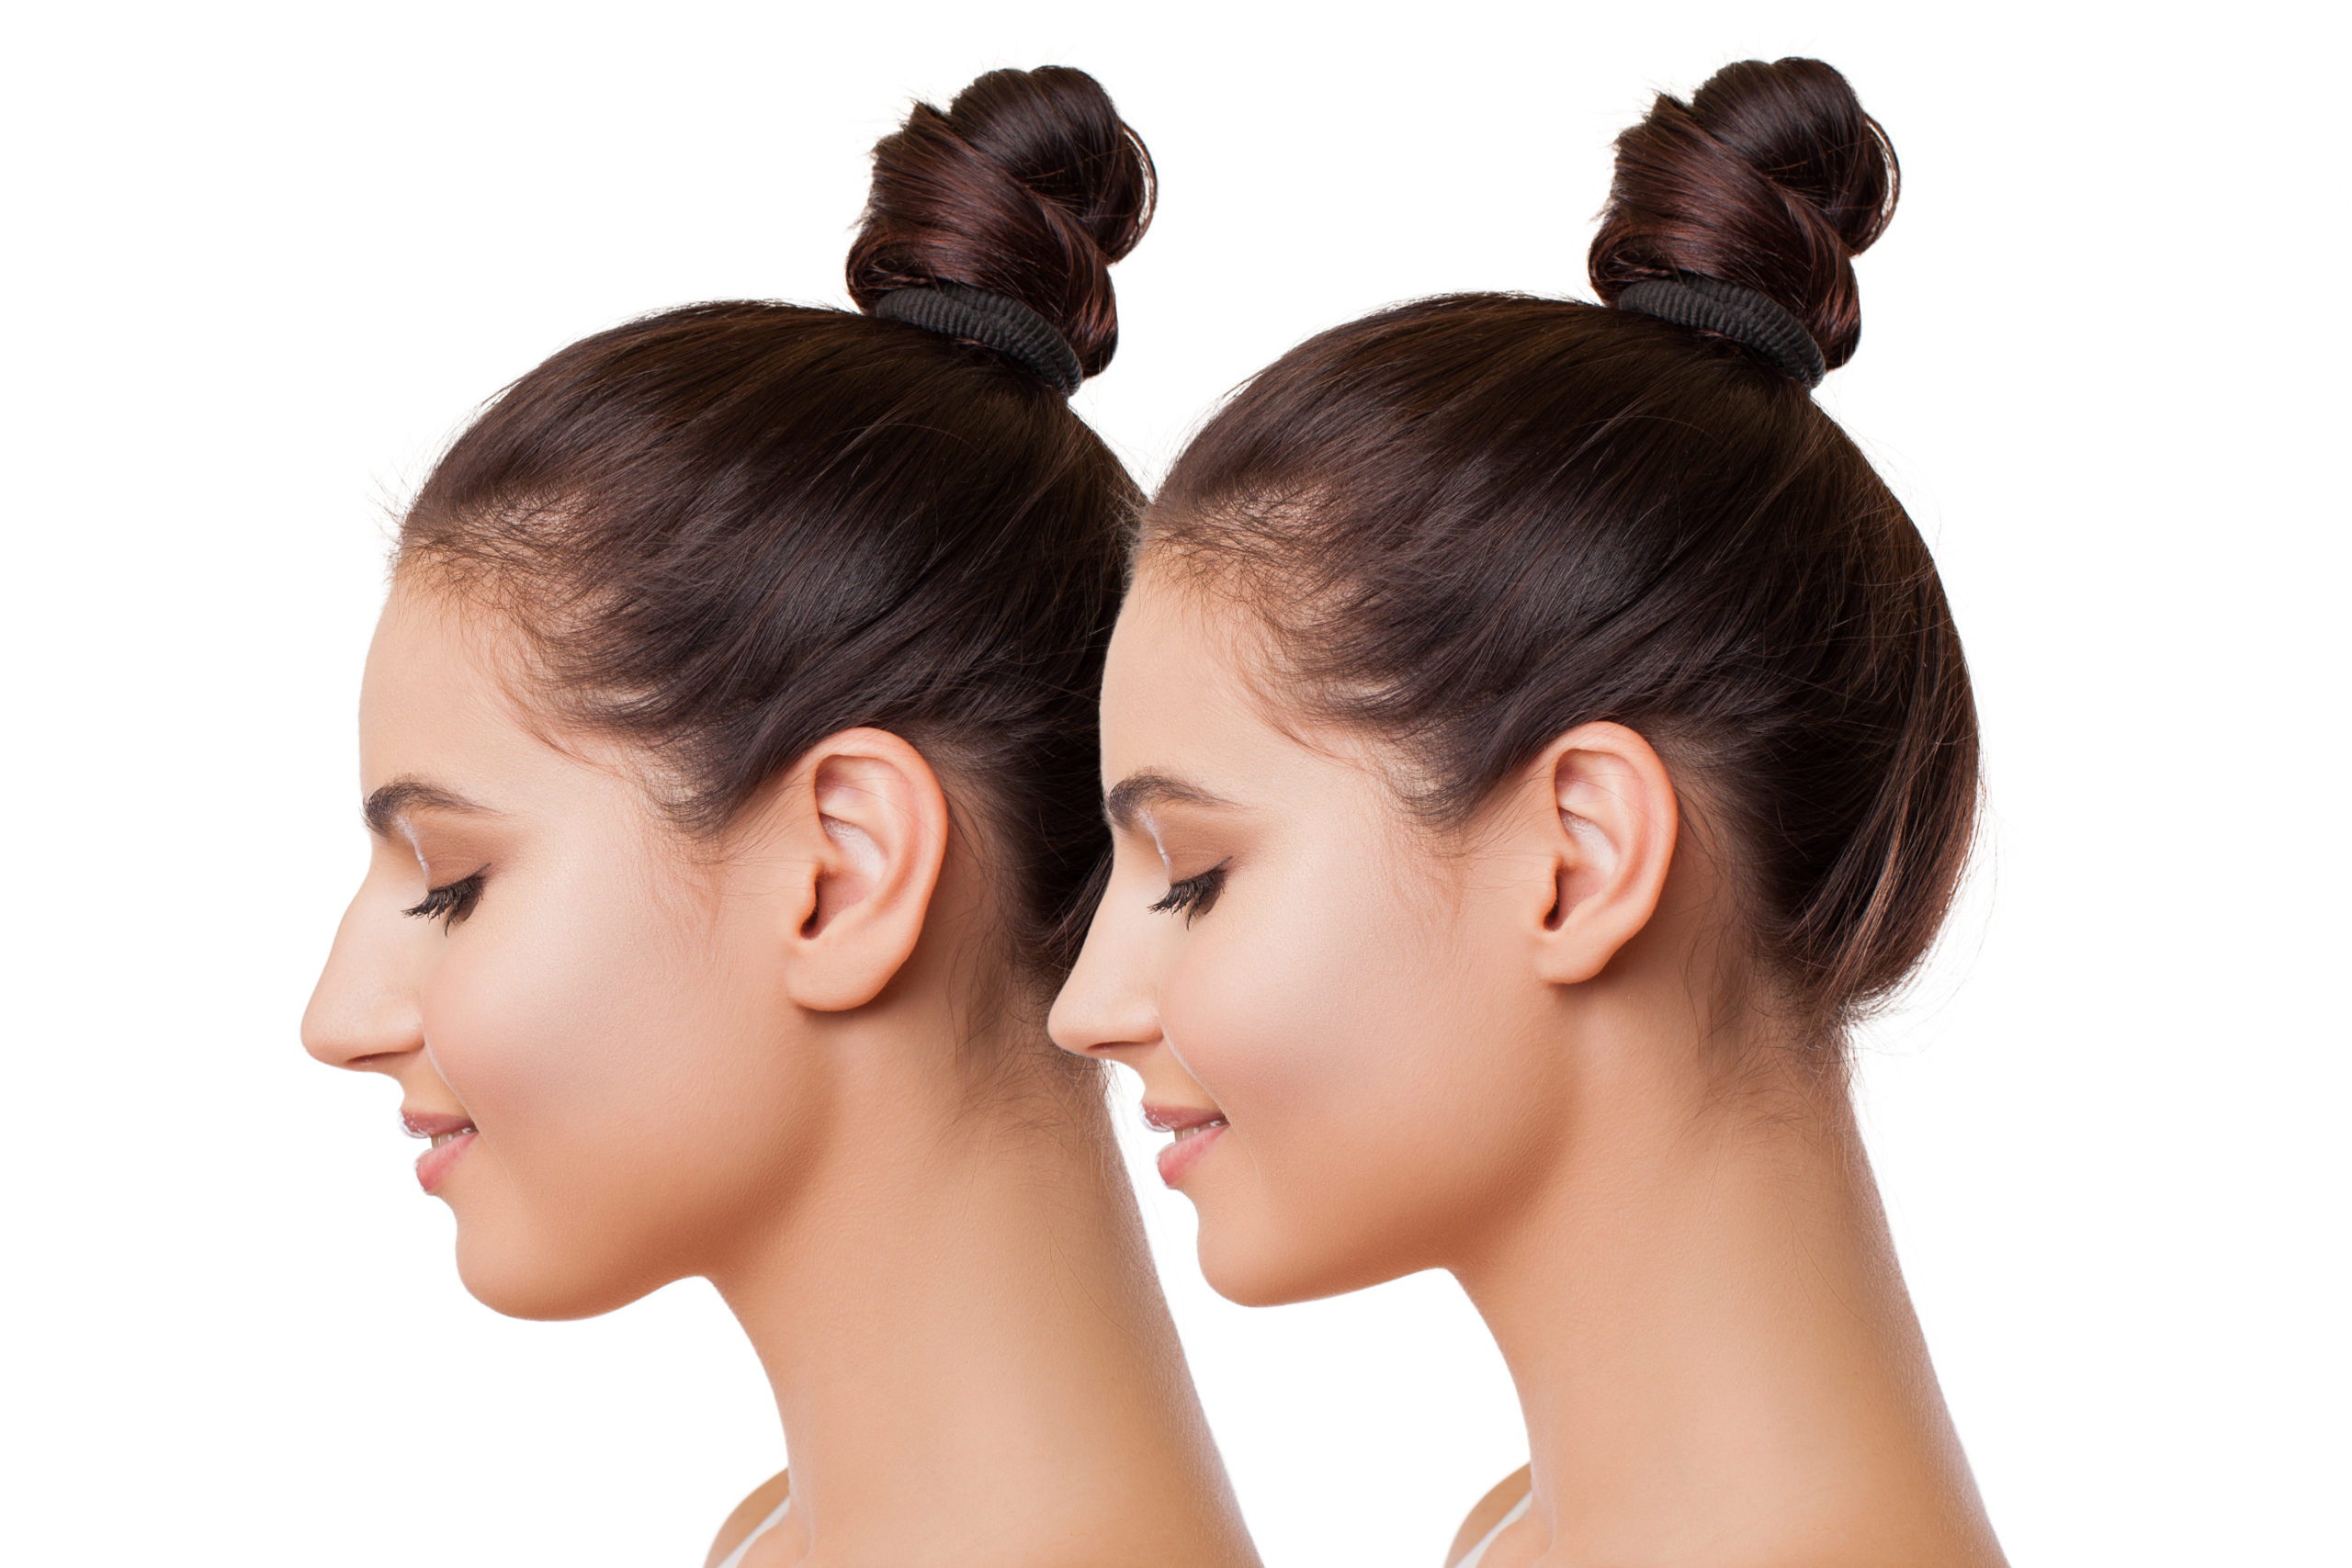 Revision Rhinoplasty in Beverly Hills